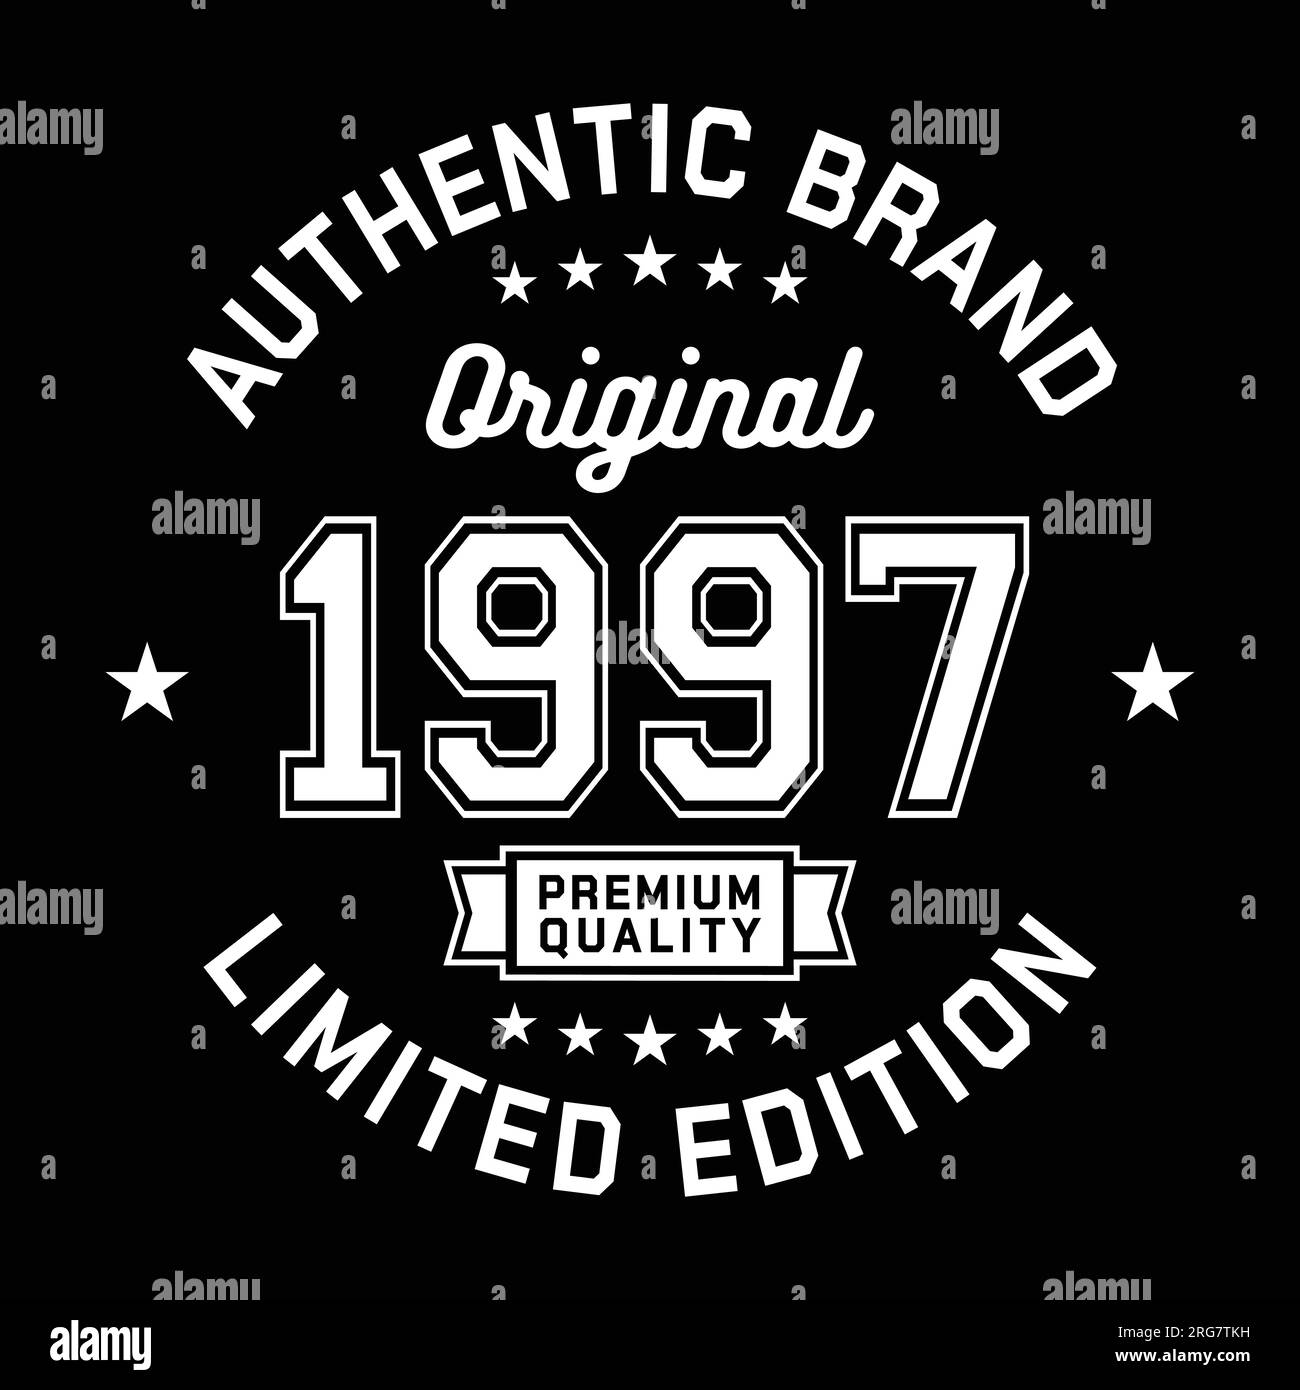 1997 Authentic brand. Apparel fashion design. Graphic design for t-shirt. Vector and illustration. Stock Vector